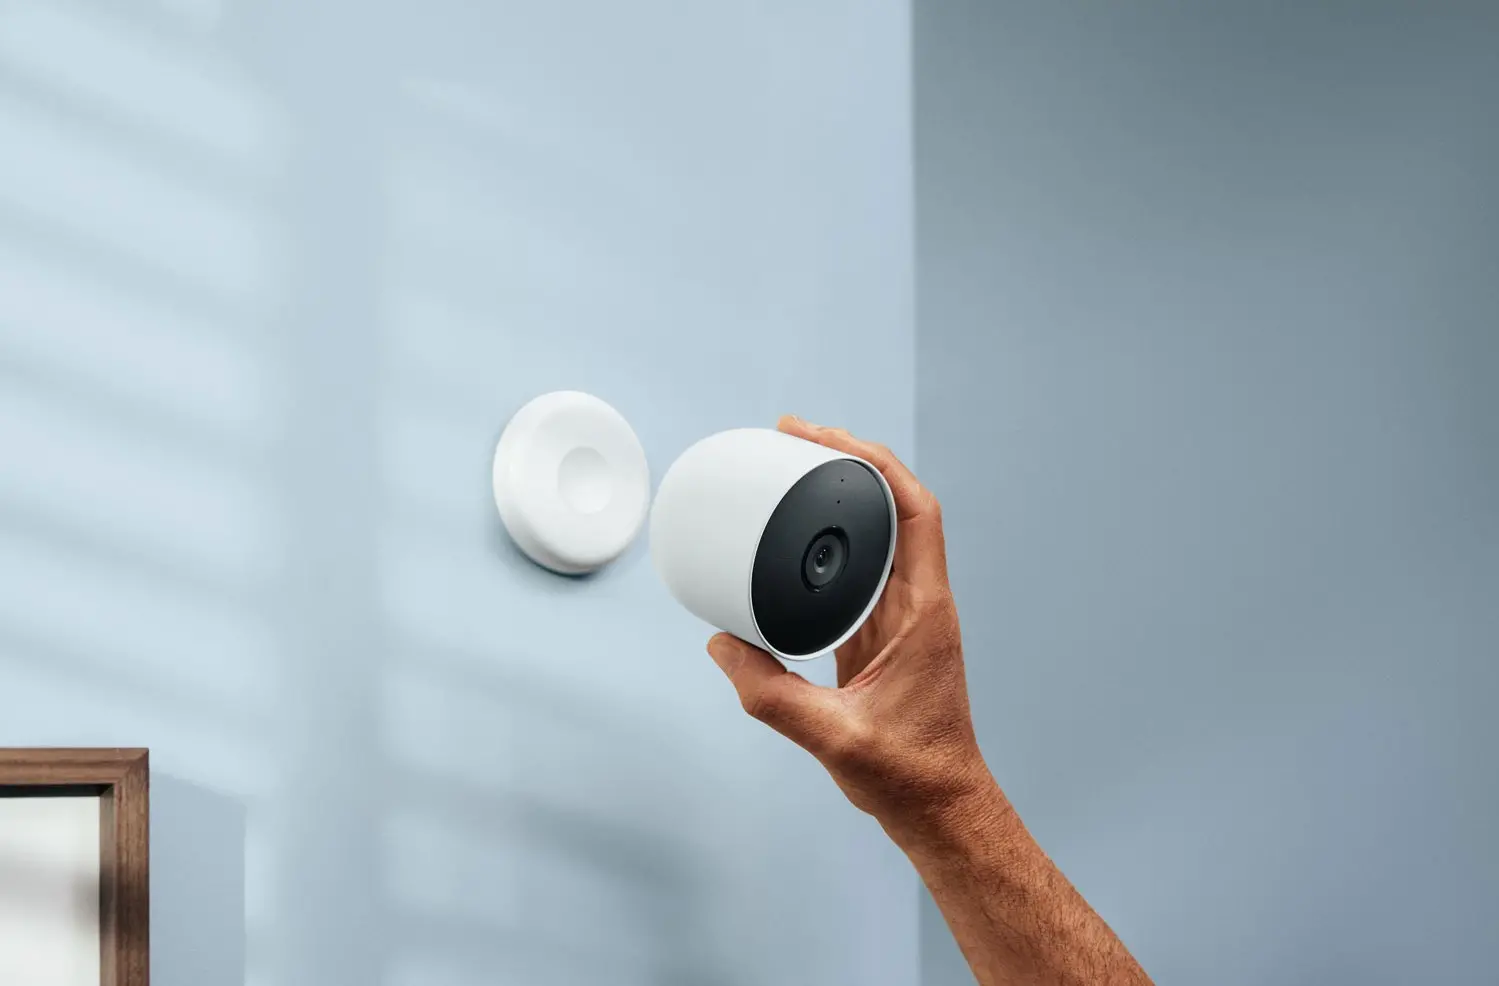 Smart cameras allow you to protect your home when you're away.